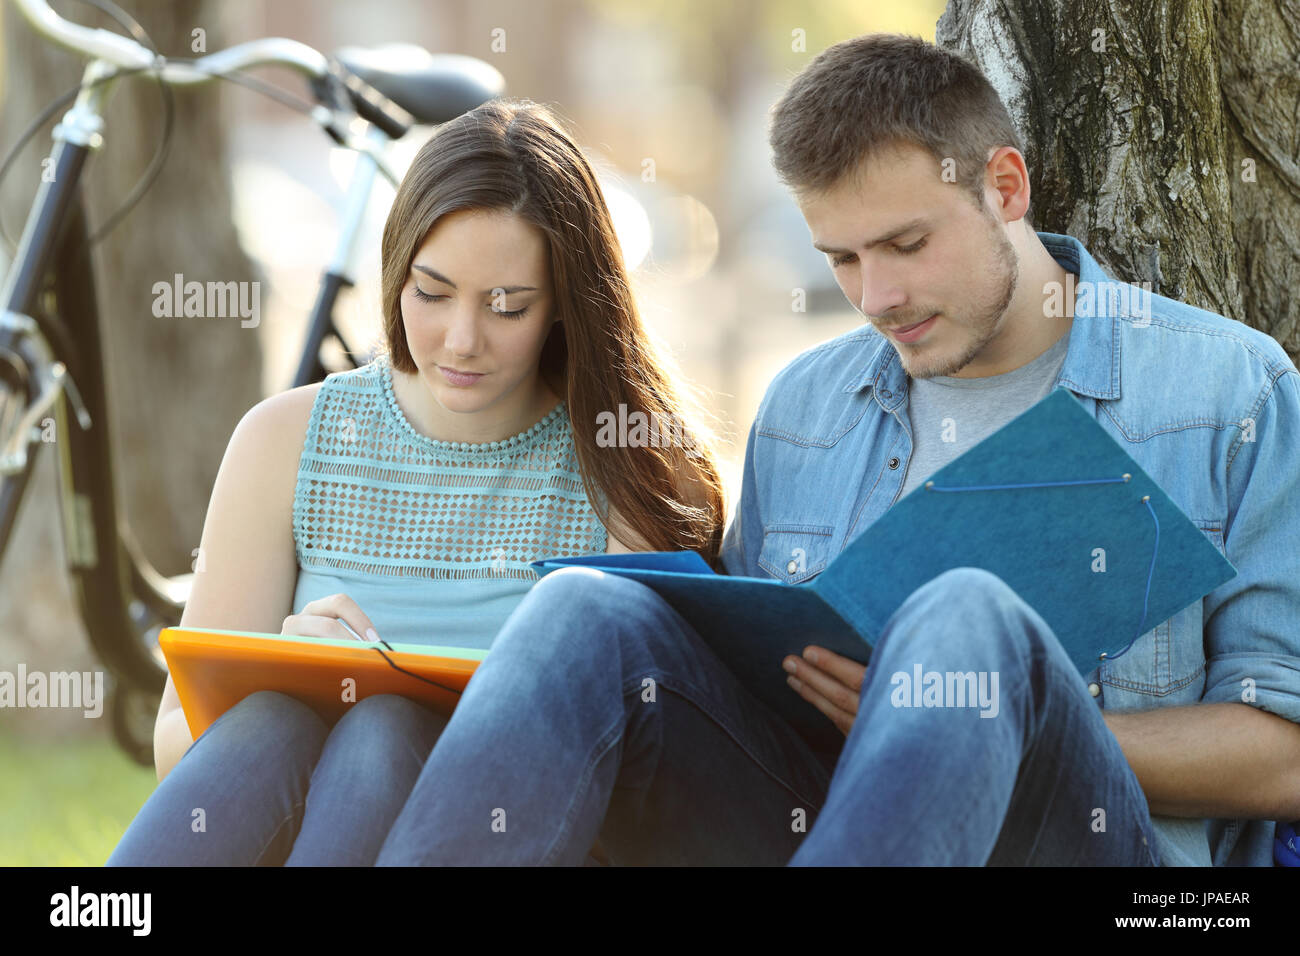 Couple of students studying together outside in a park Stock Photo